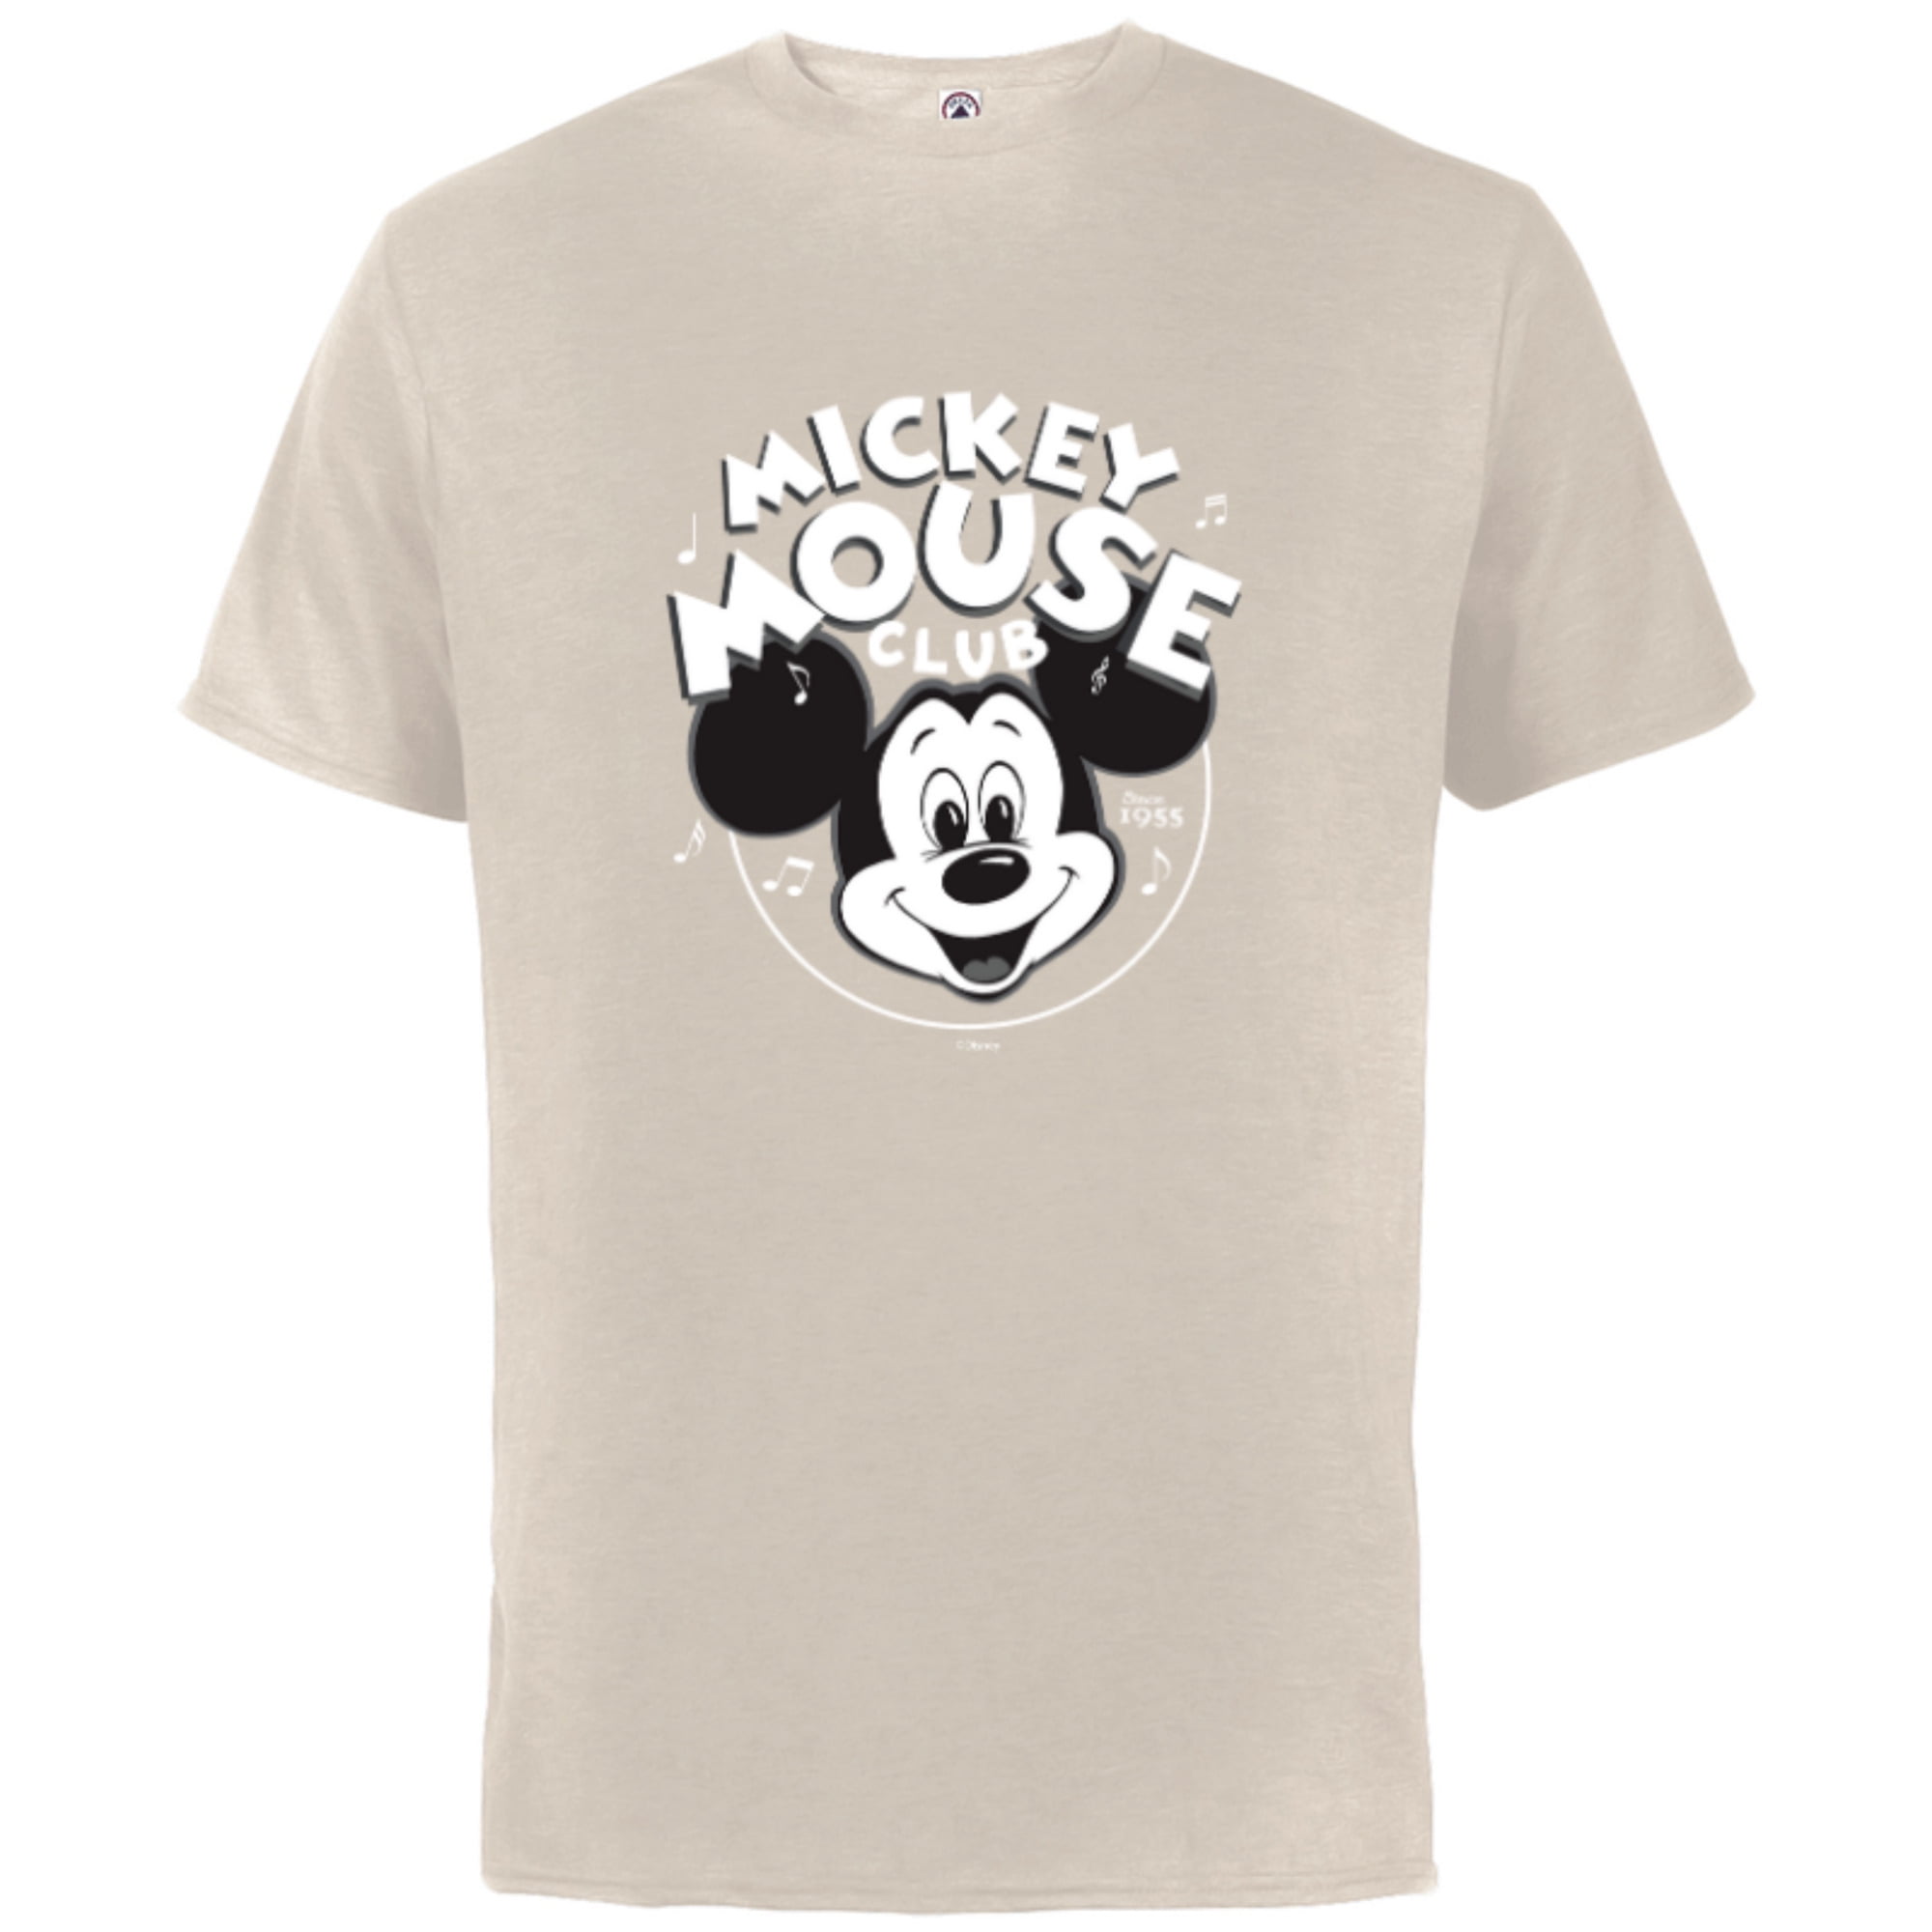 The Mickey Mouse Club Logo T-Shirt for Adults – Black